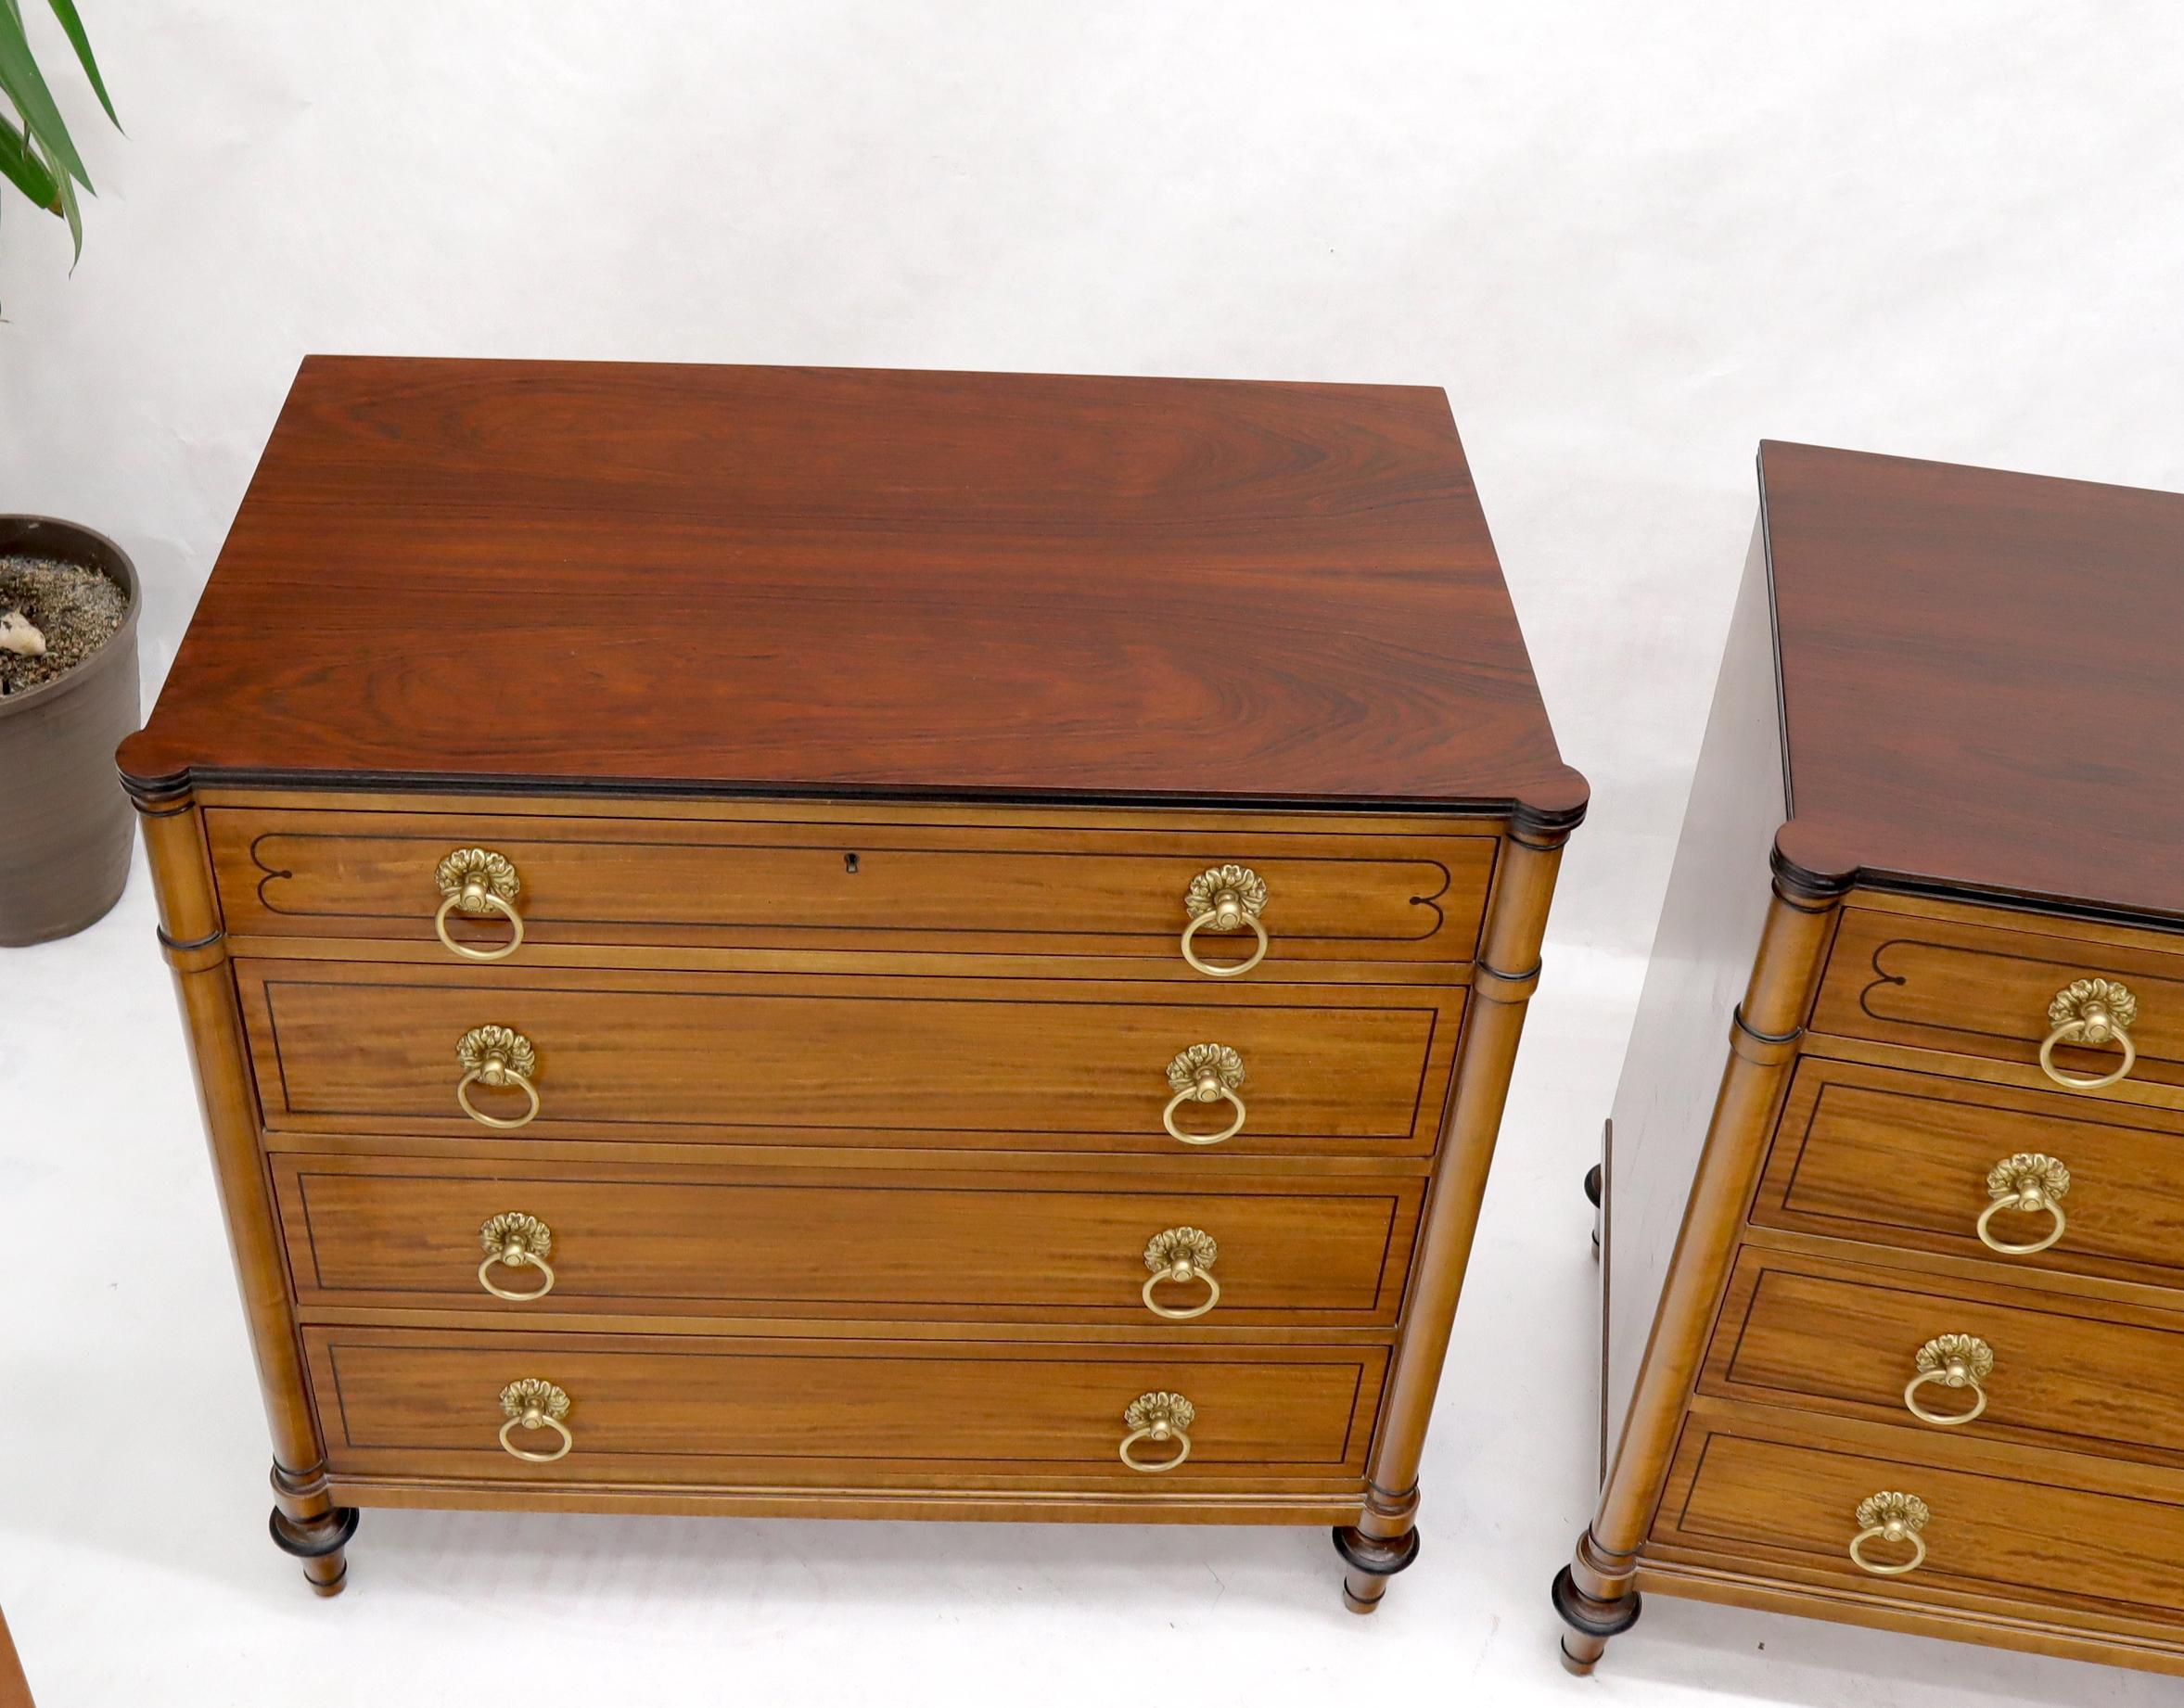 Pair of Hollywood Regency style rosewood tops bachelor chests by Kittinger. Pair of super high quality decorative cabinets.